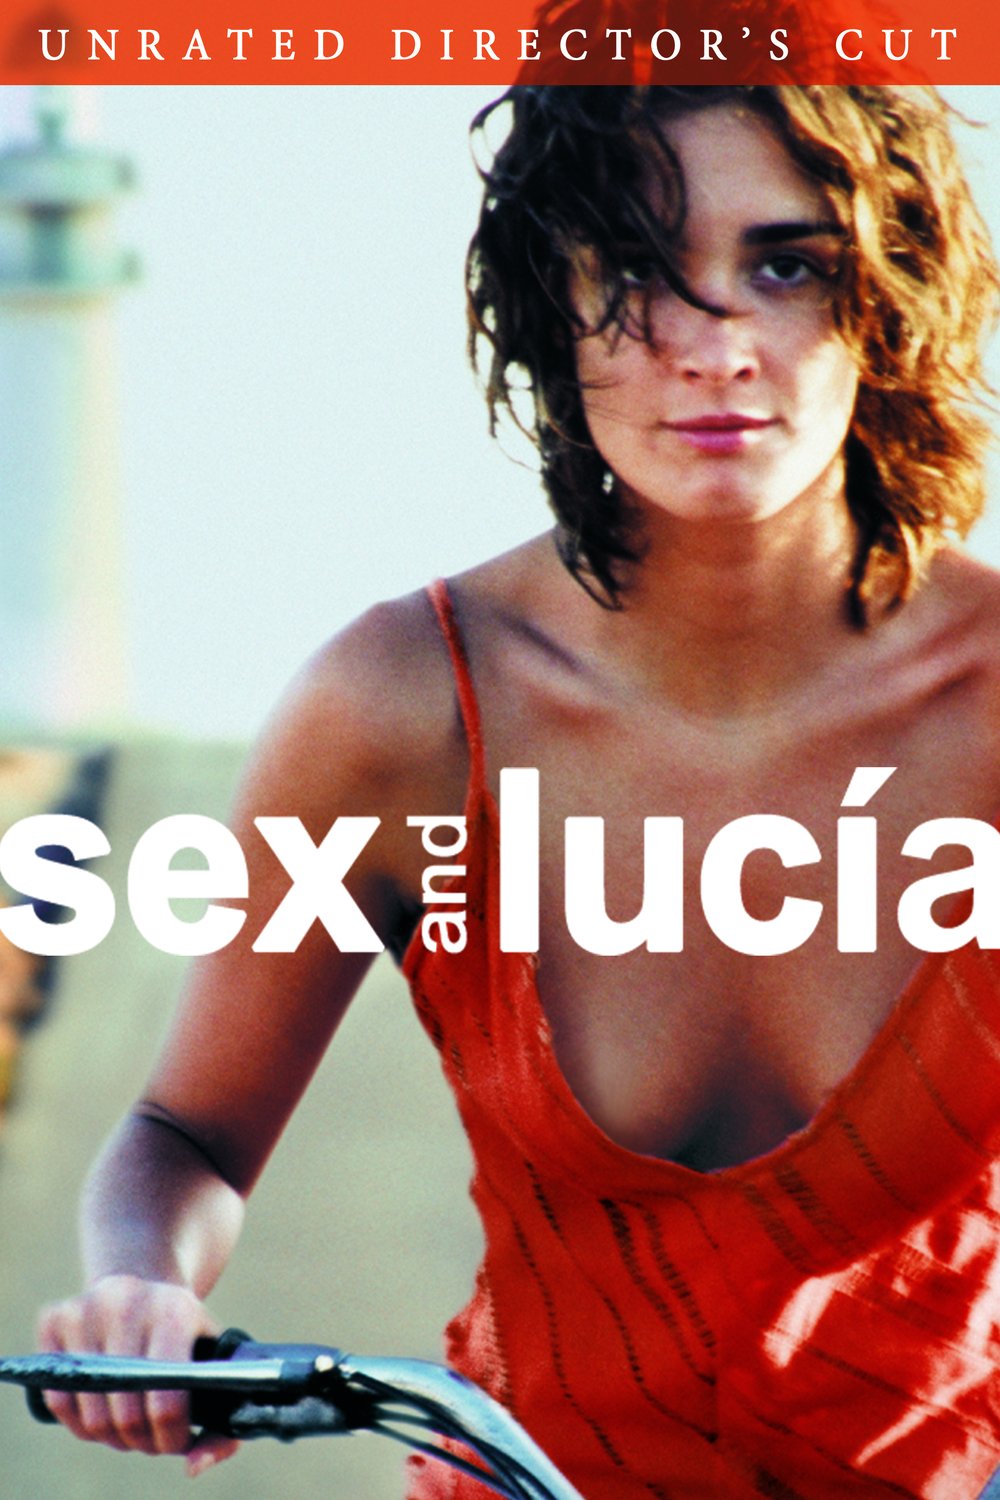 Poster of the movie Sex and Lucia